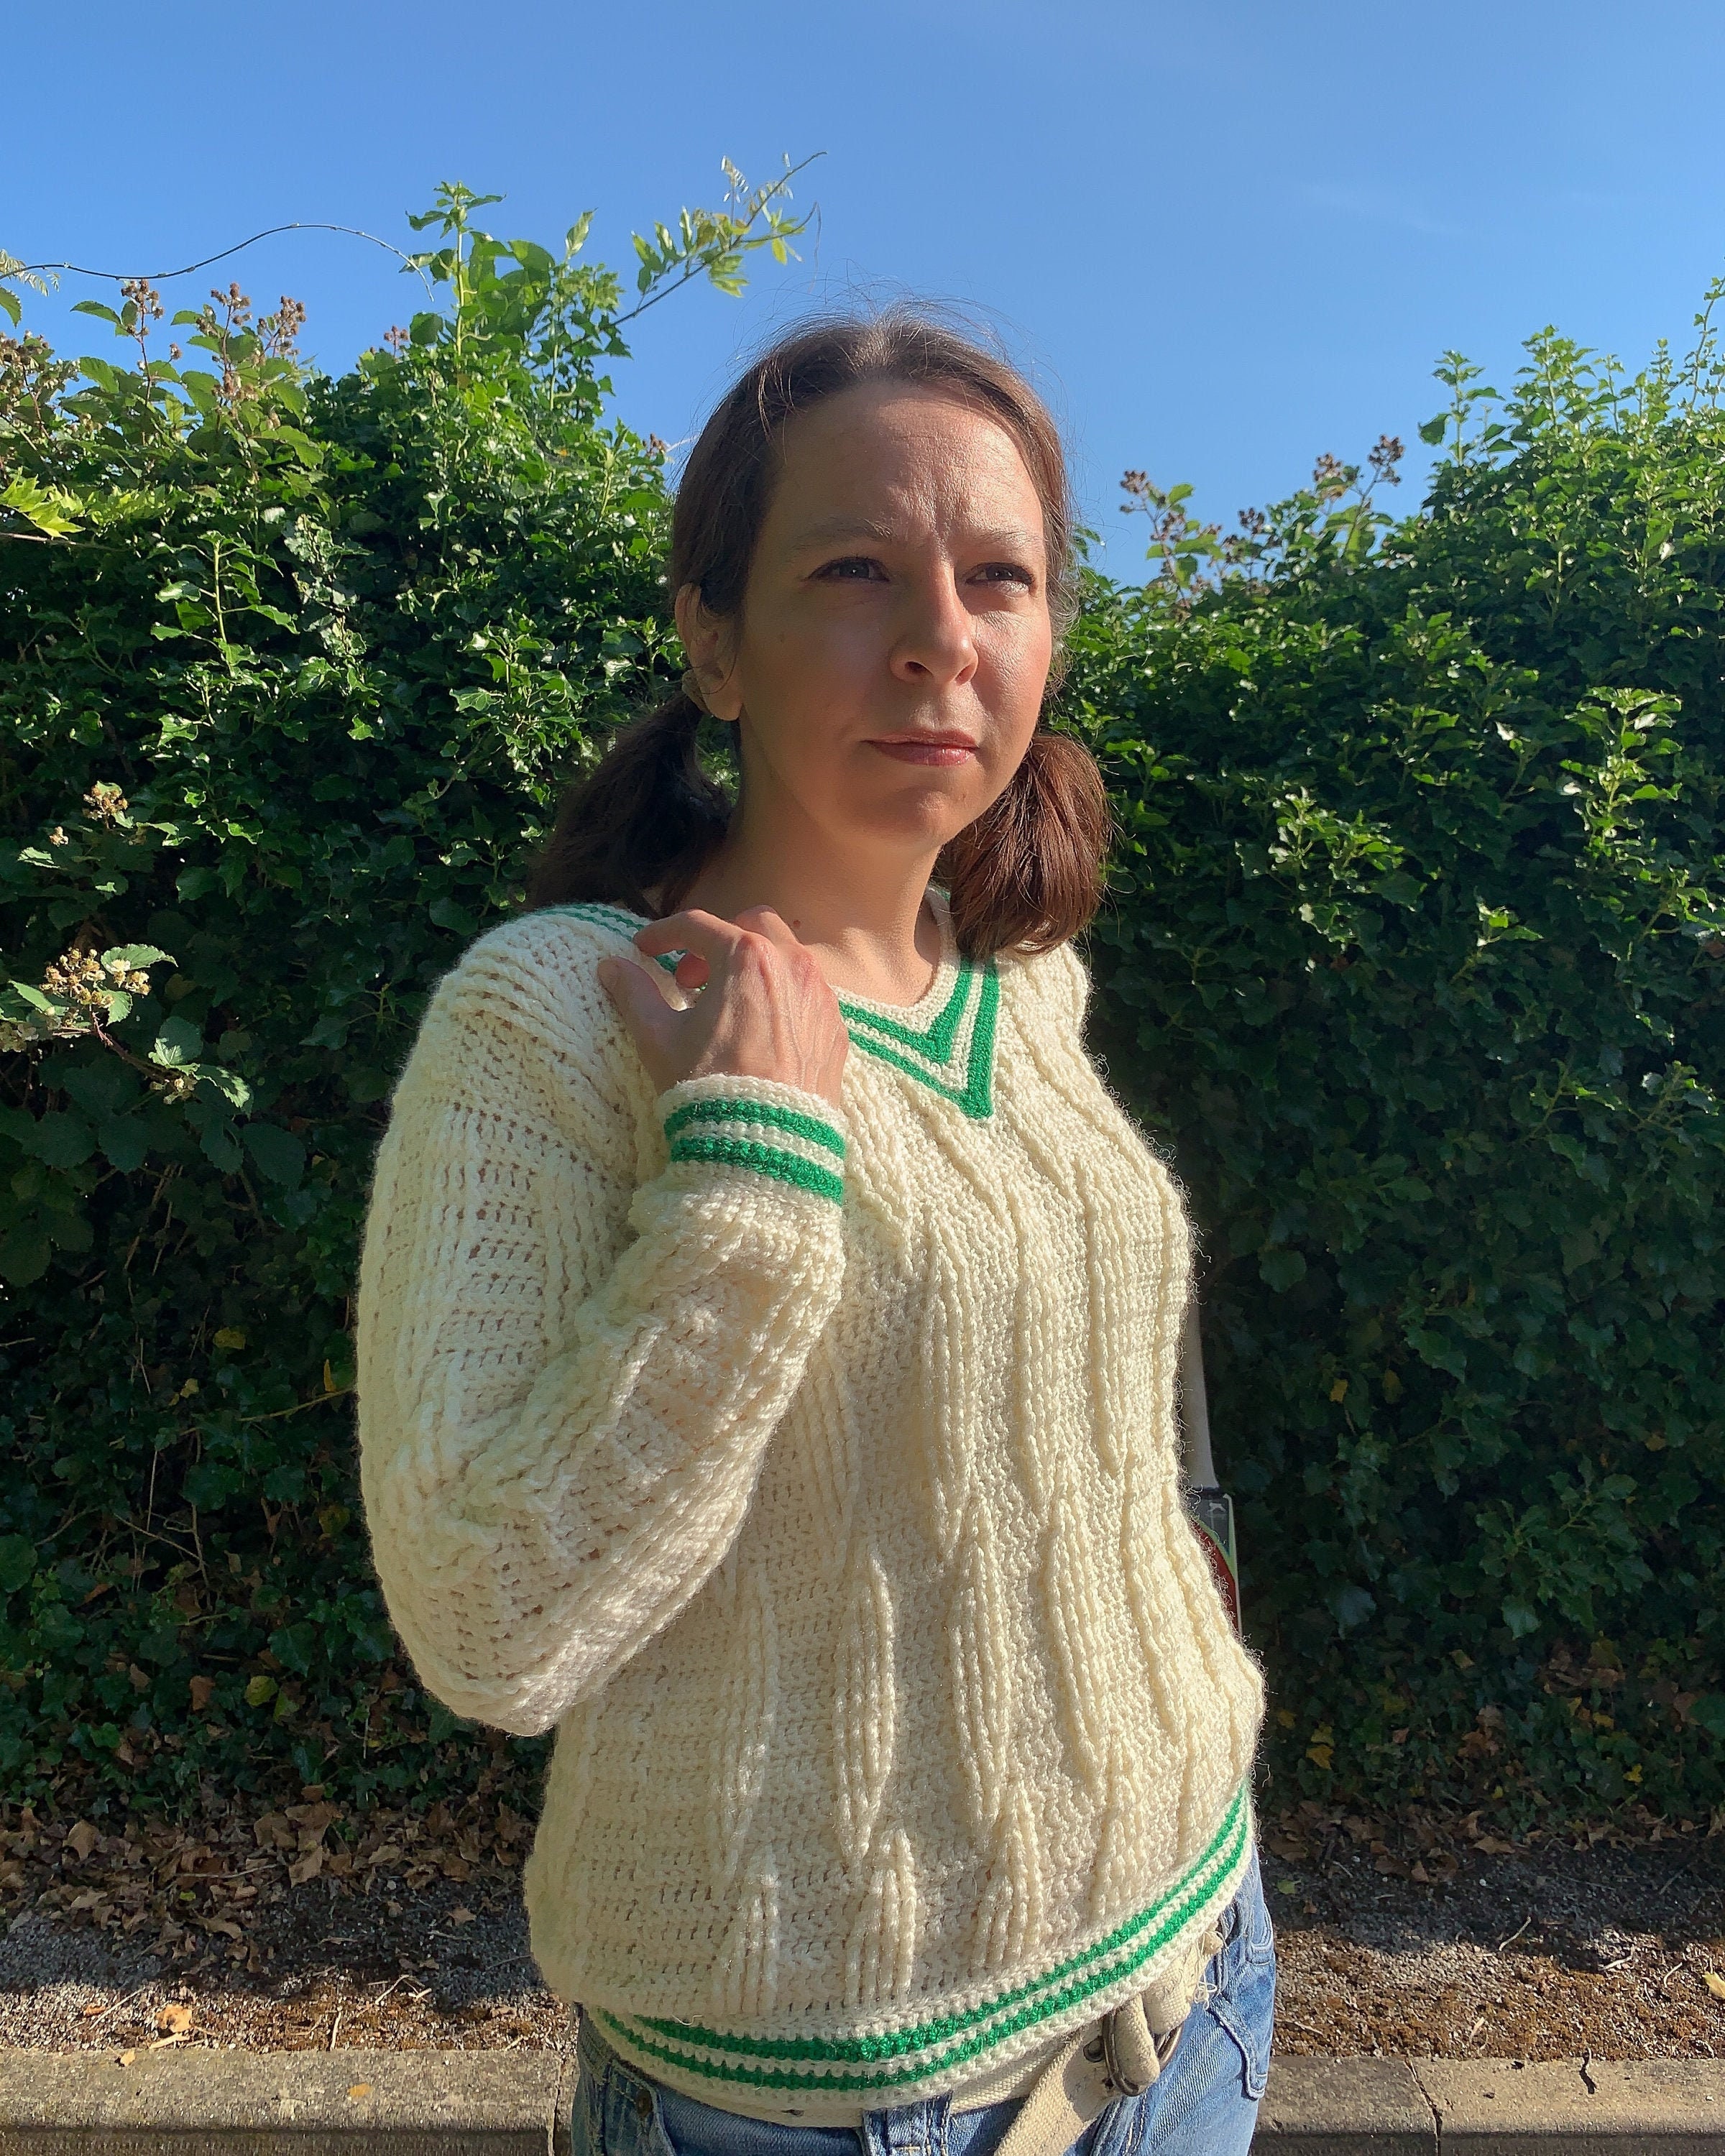 Ladies Cable Knit Cricket Jumper In Ecru and Orchid